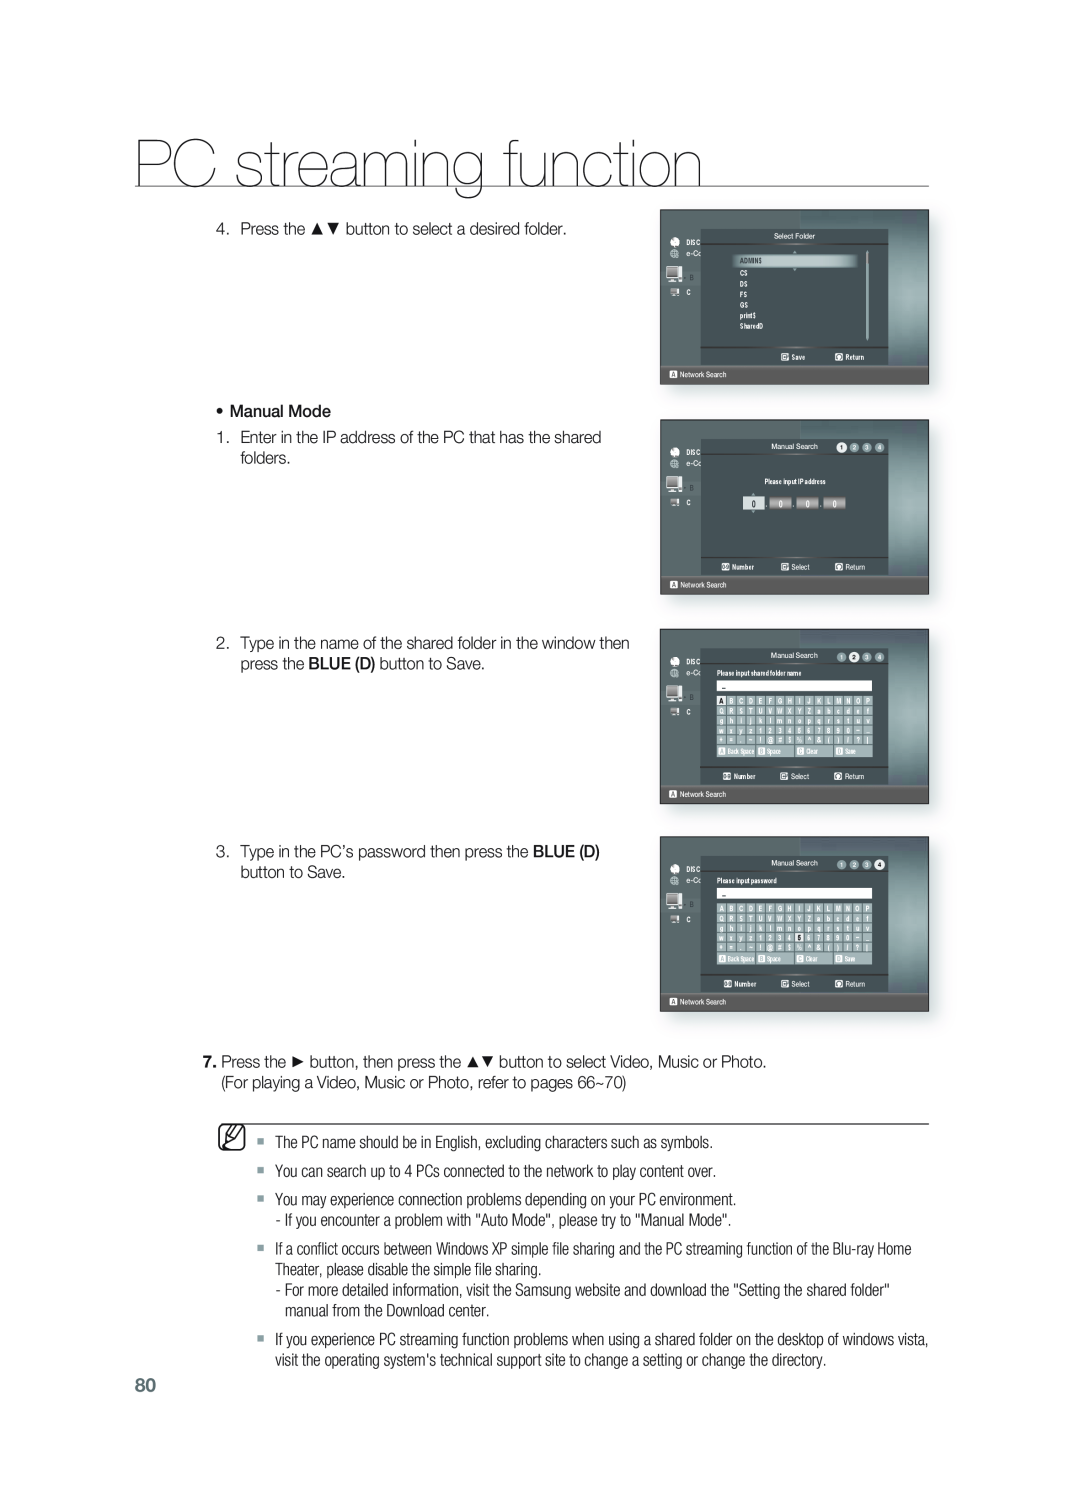 Samsung HT-BD1255, HT-BD1252 user manual PC streaming function, Press the button to select a desired folder 